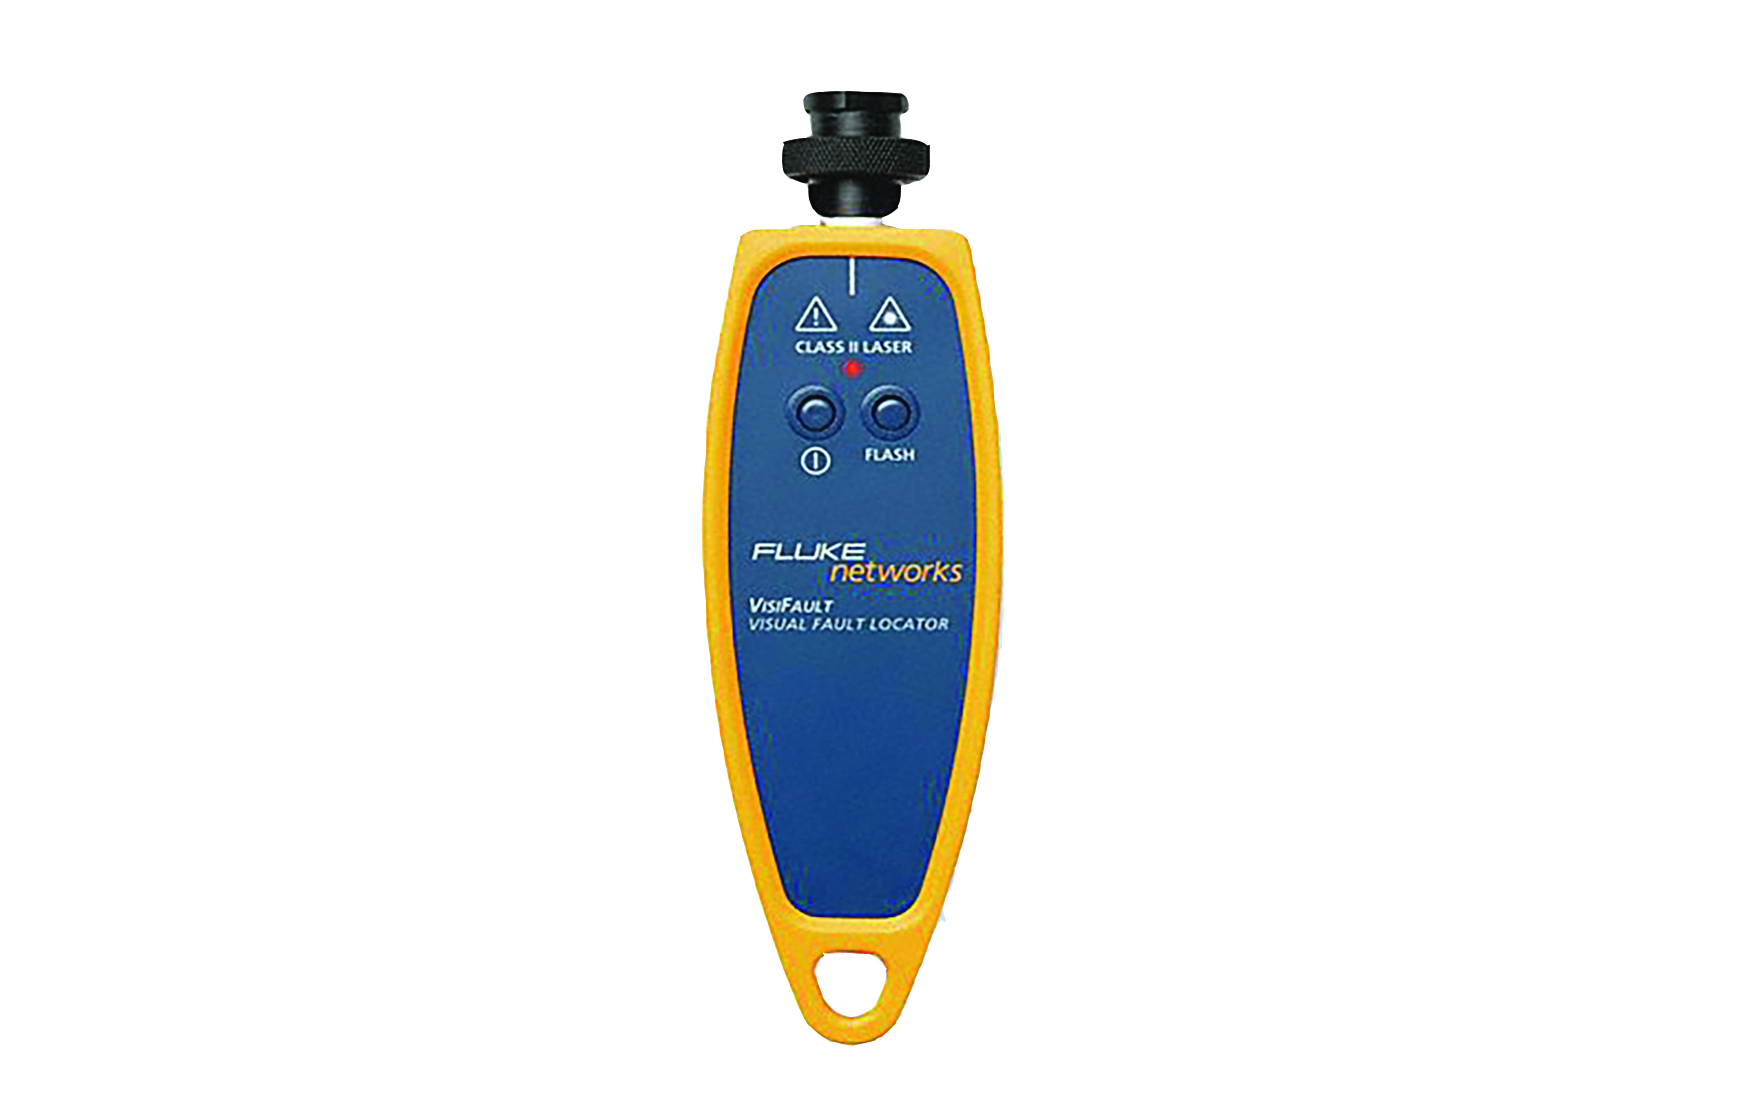 Blue and yellow fault finder device. Image by Fluke Network.